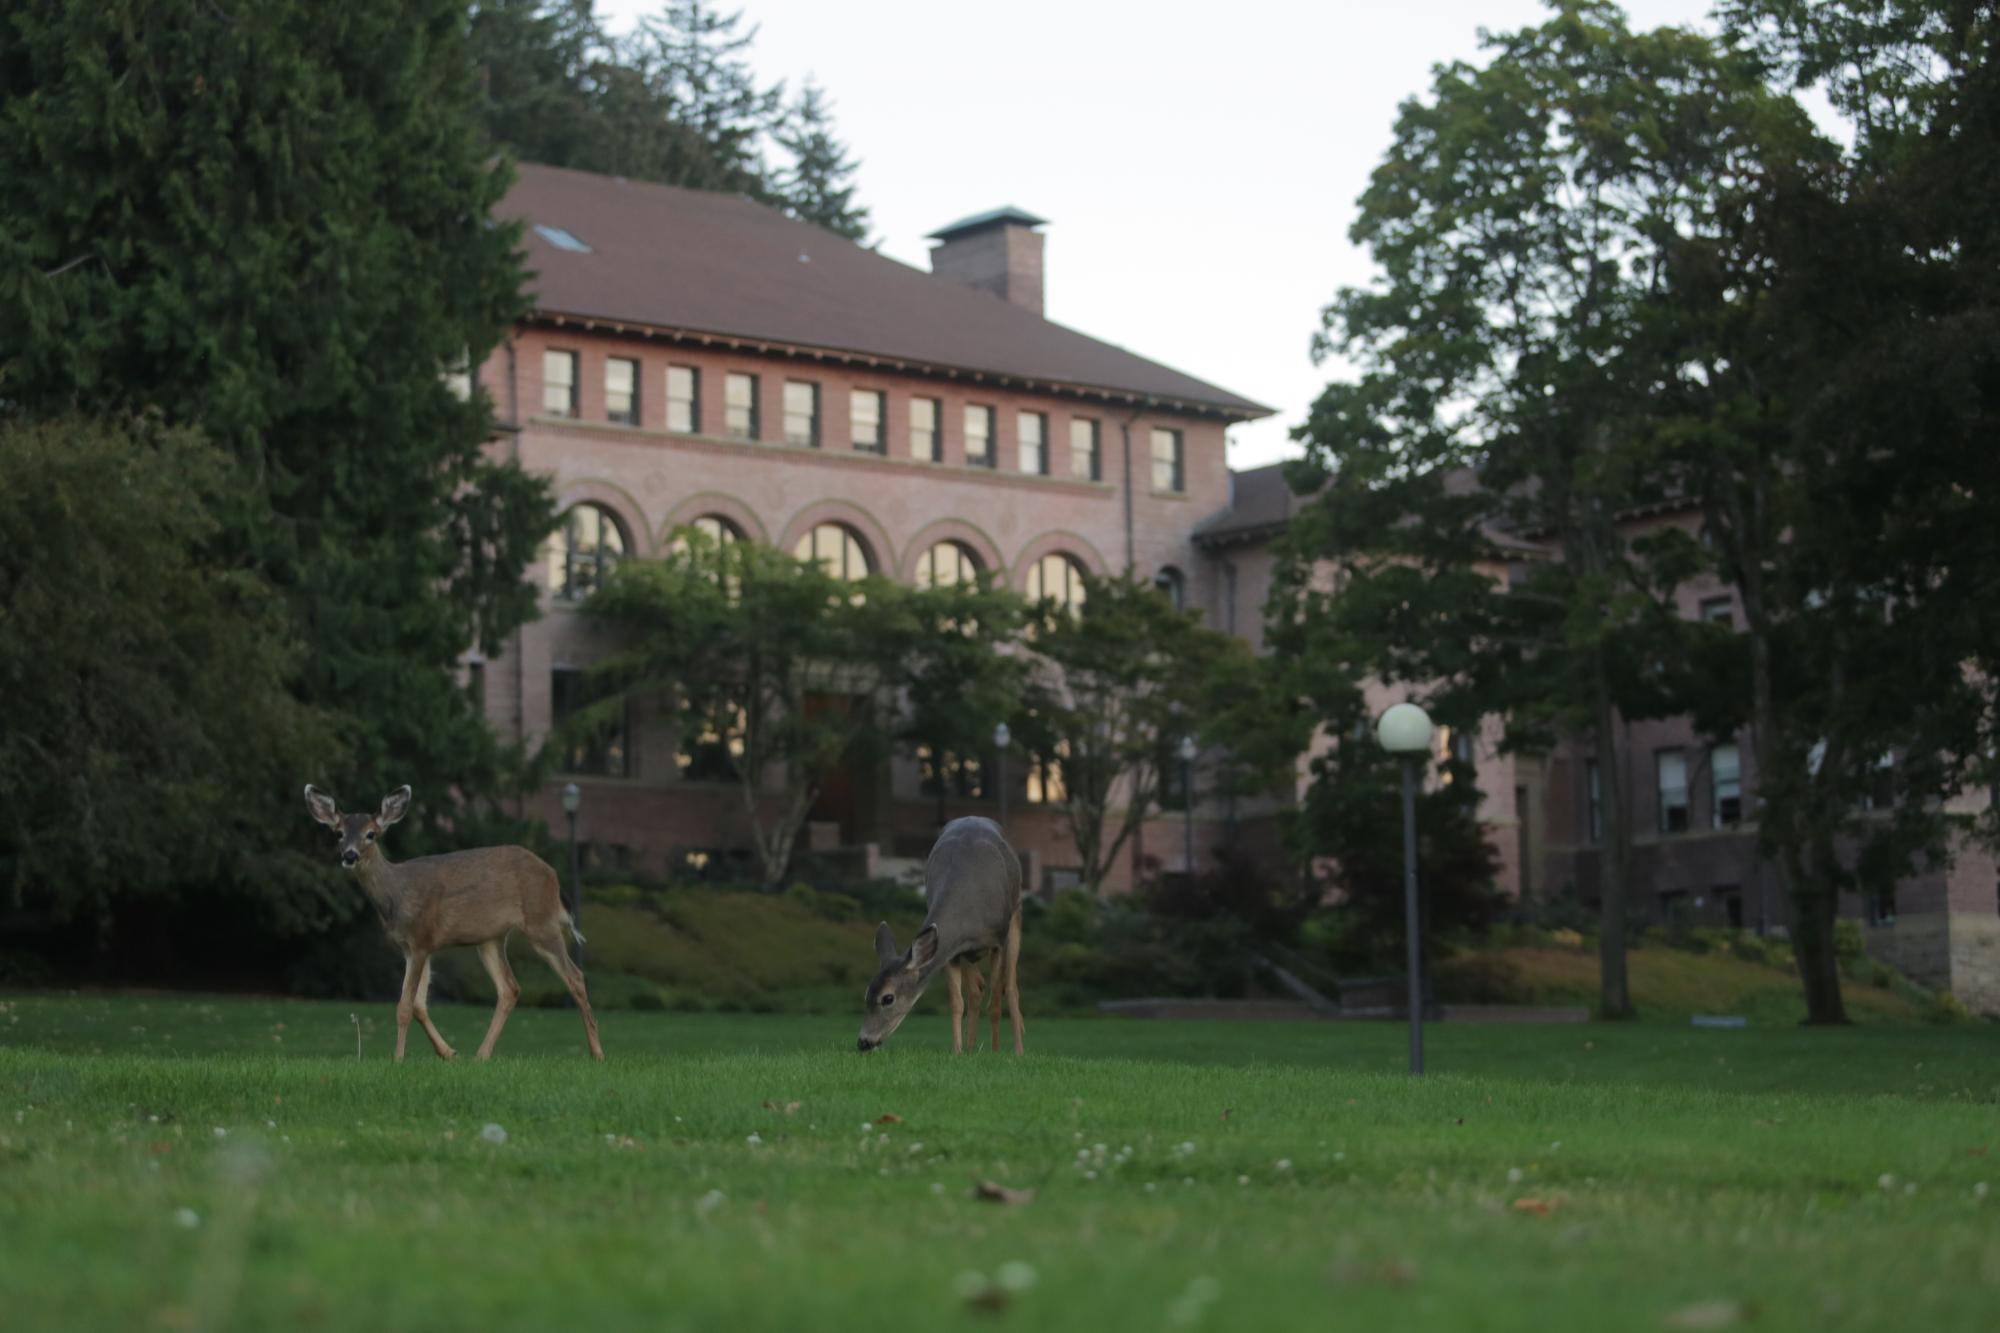 Deer on lawn in front of brick building